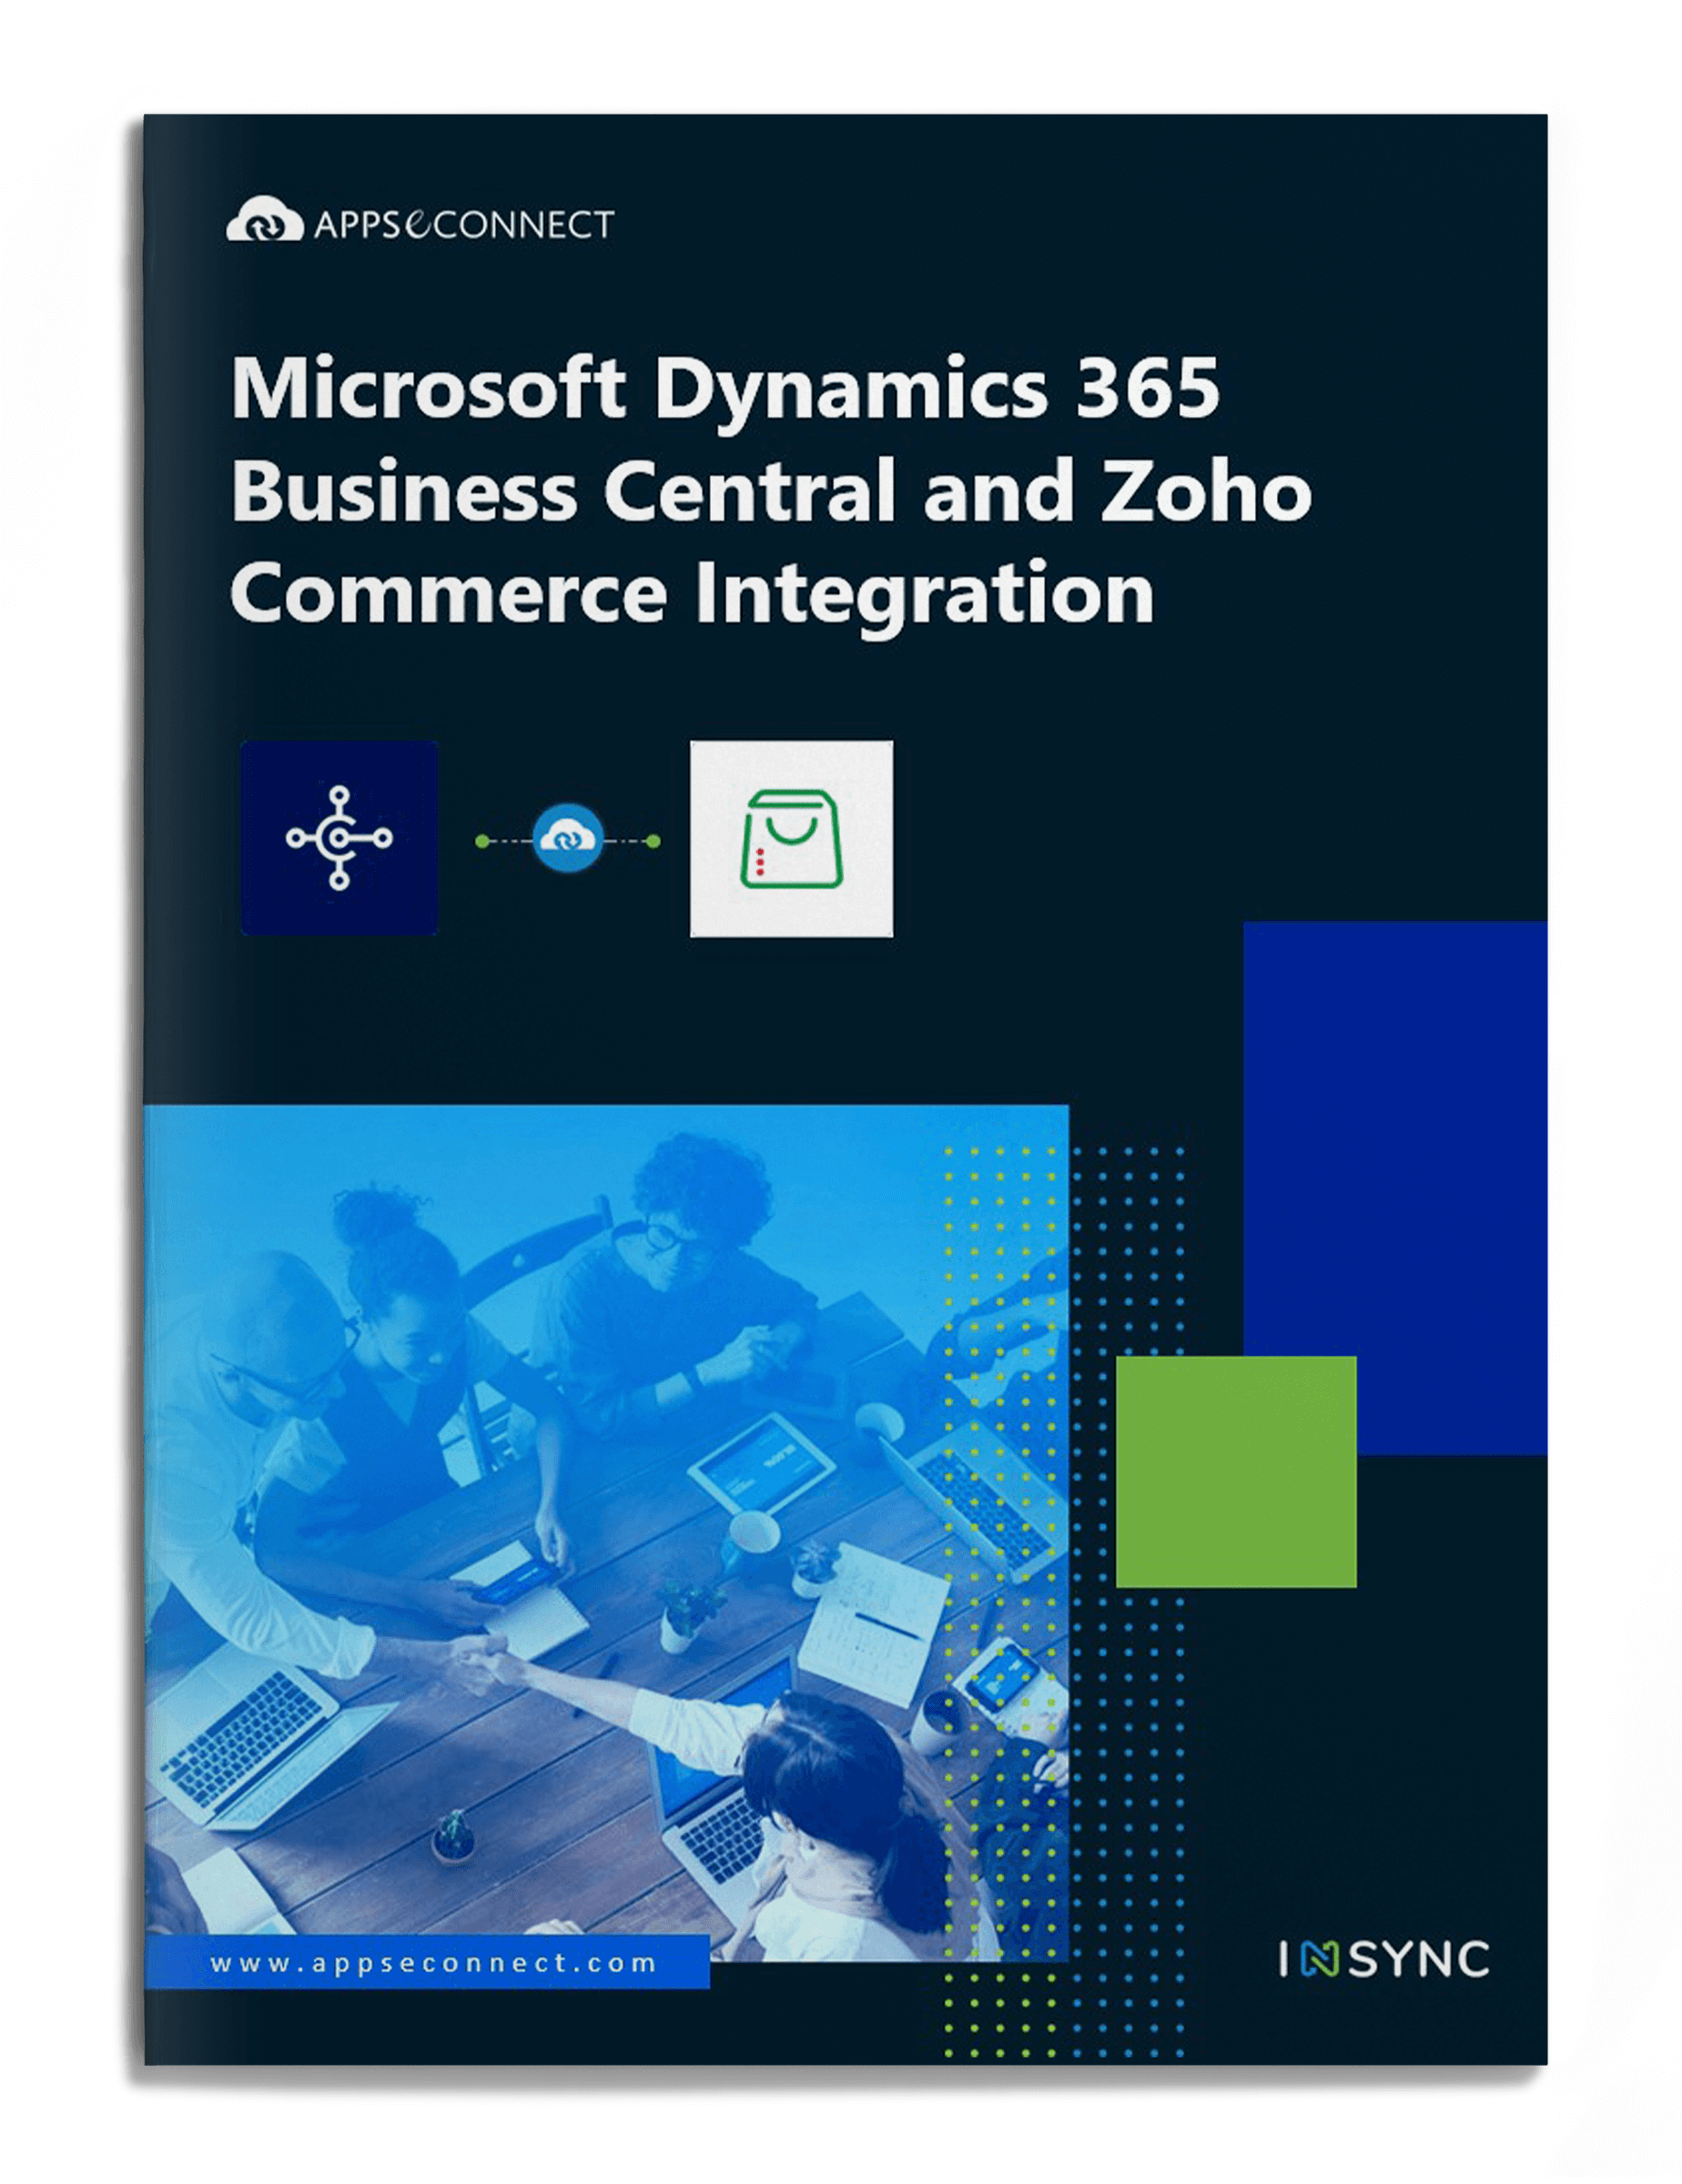 microsoft-dynamics-365-business-central-erp-zoho-commerce-integration-brochure-cover